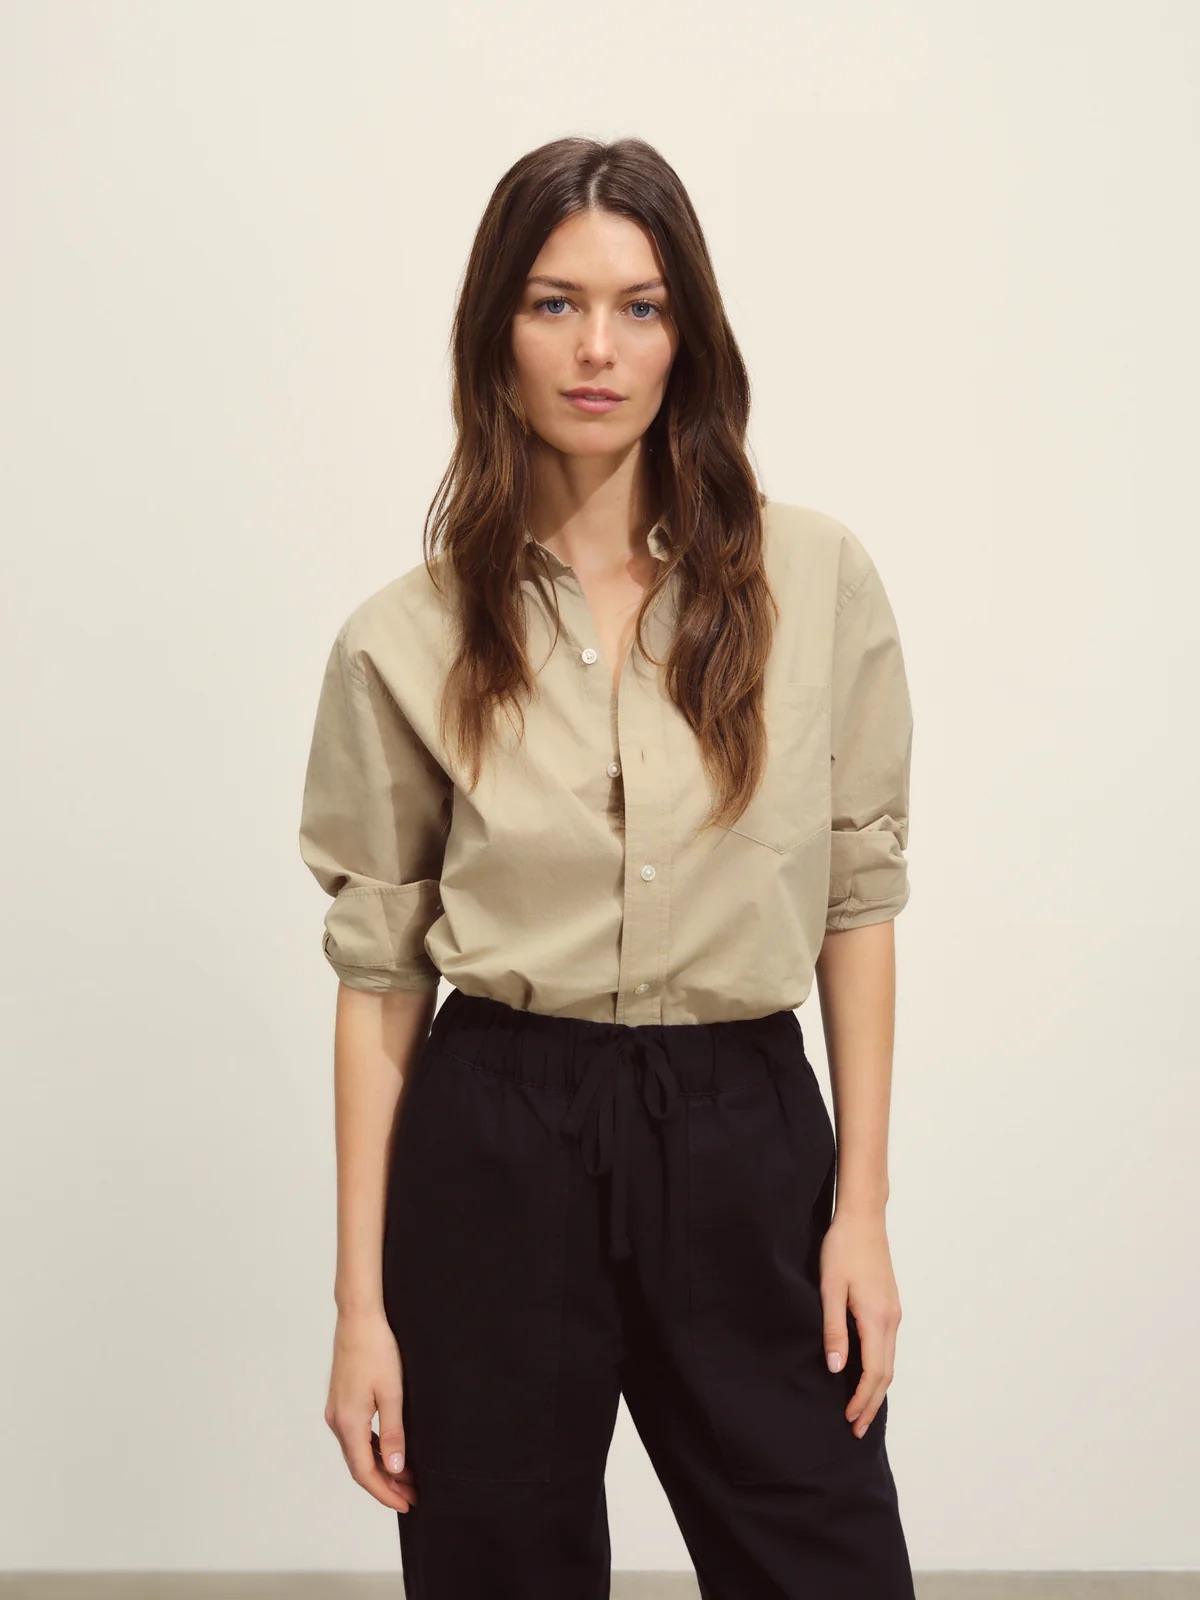 Woman in a beige blouse and black trousers standing against a neutral background.